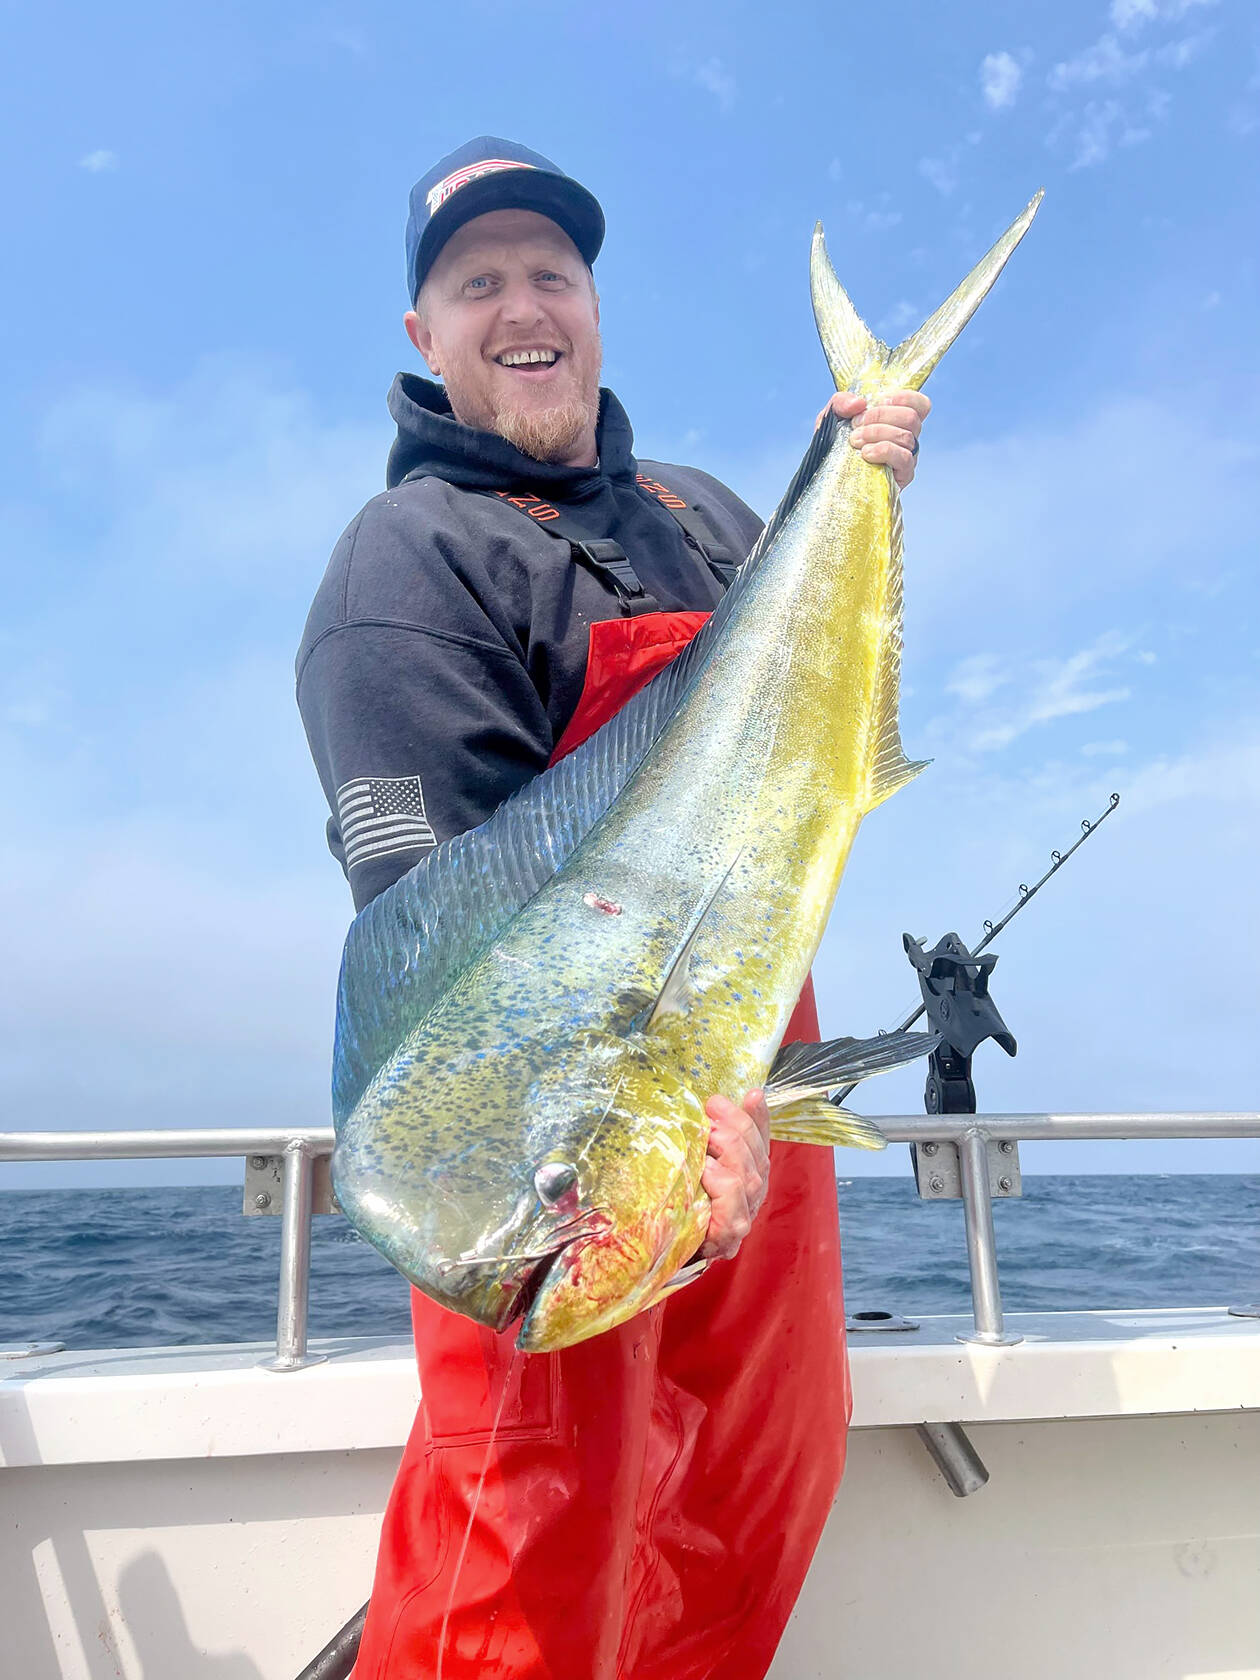 Wade La Fontaine caught this state-record 21-pound, mahi mahi or dorado while charter fishing off Westport on Aug. 25.